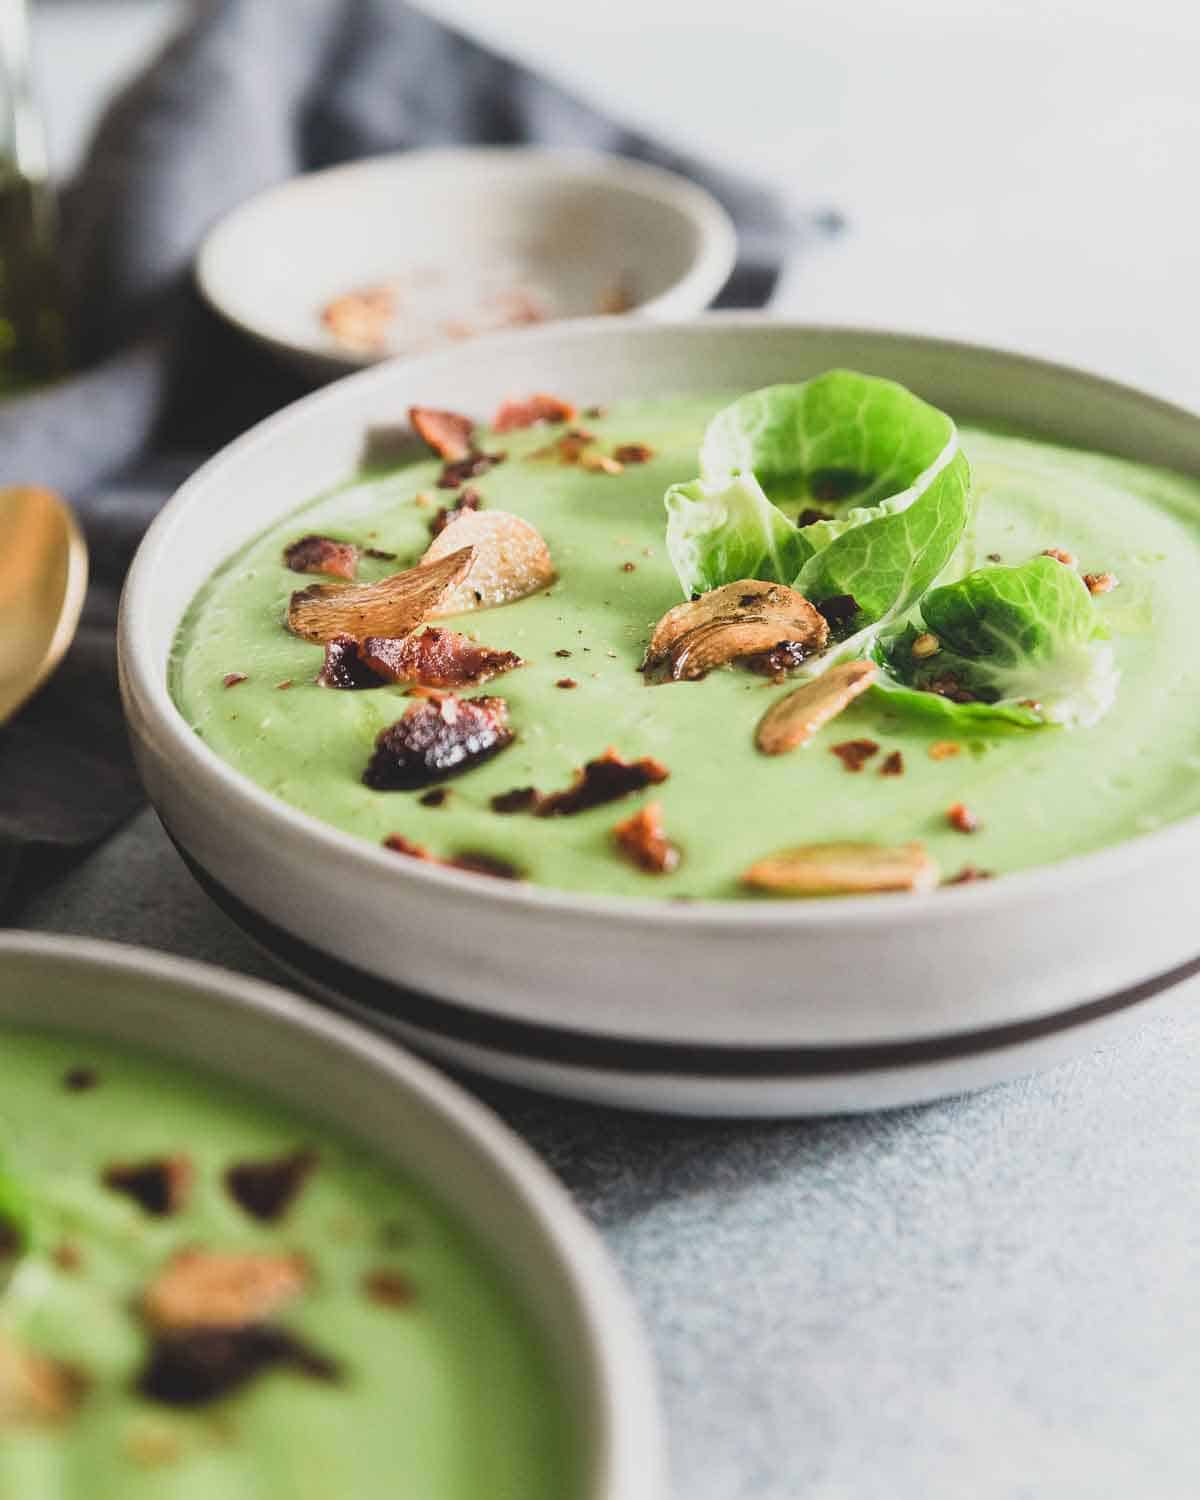 This creamy Brussels sprout soup is filled with garlic flavor and easily made right in the blender in just minutes. It's dairy free, gluten free and easily made vegan.